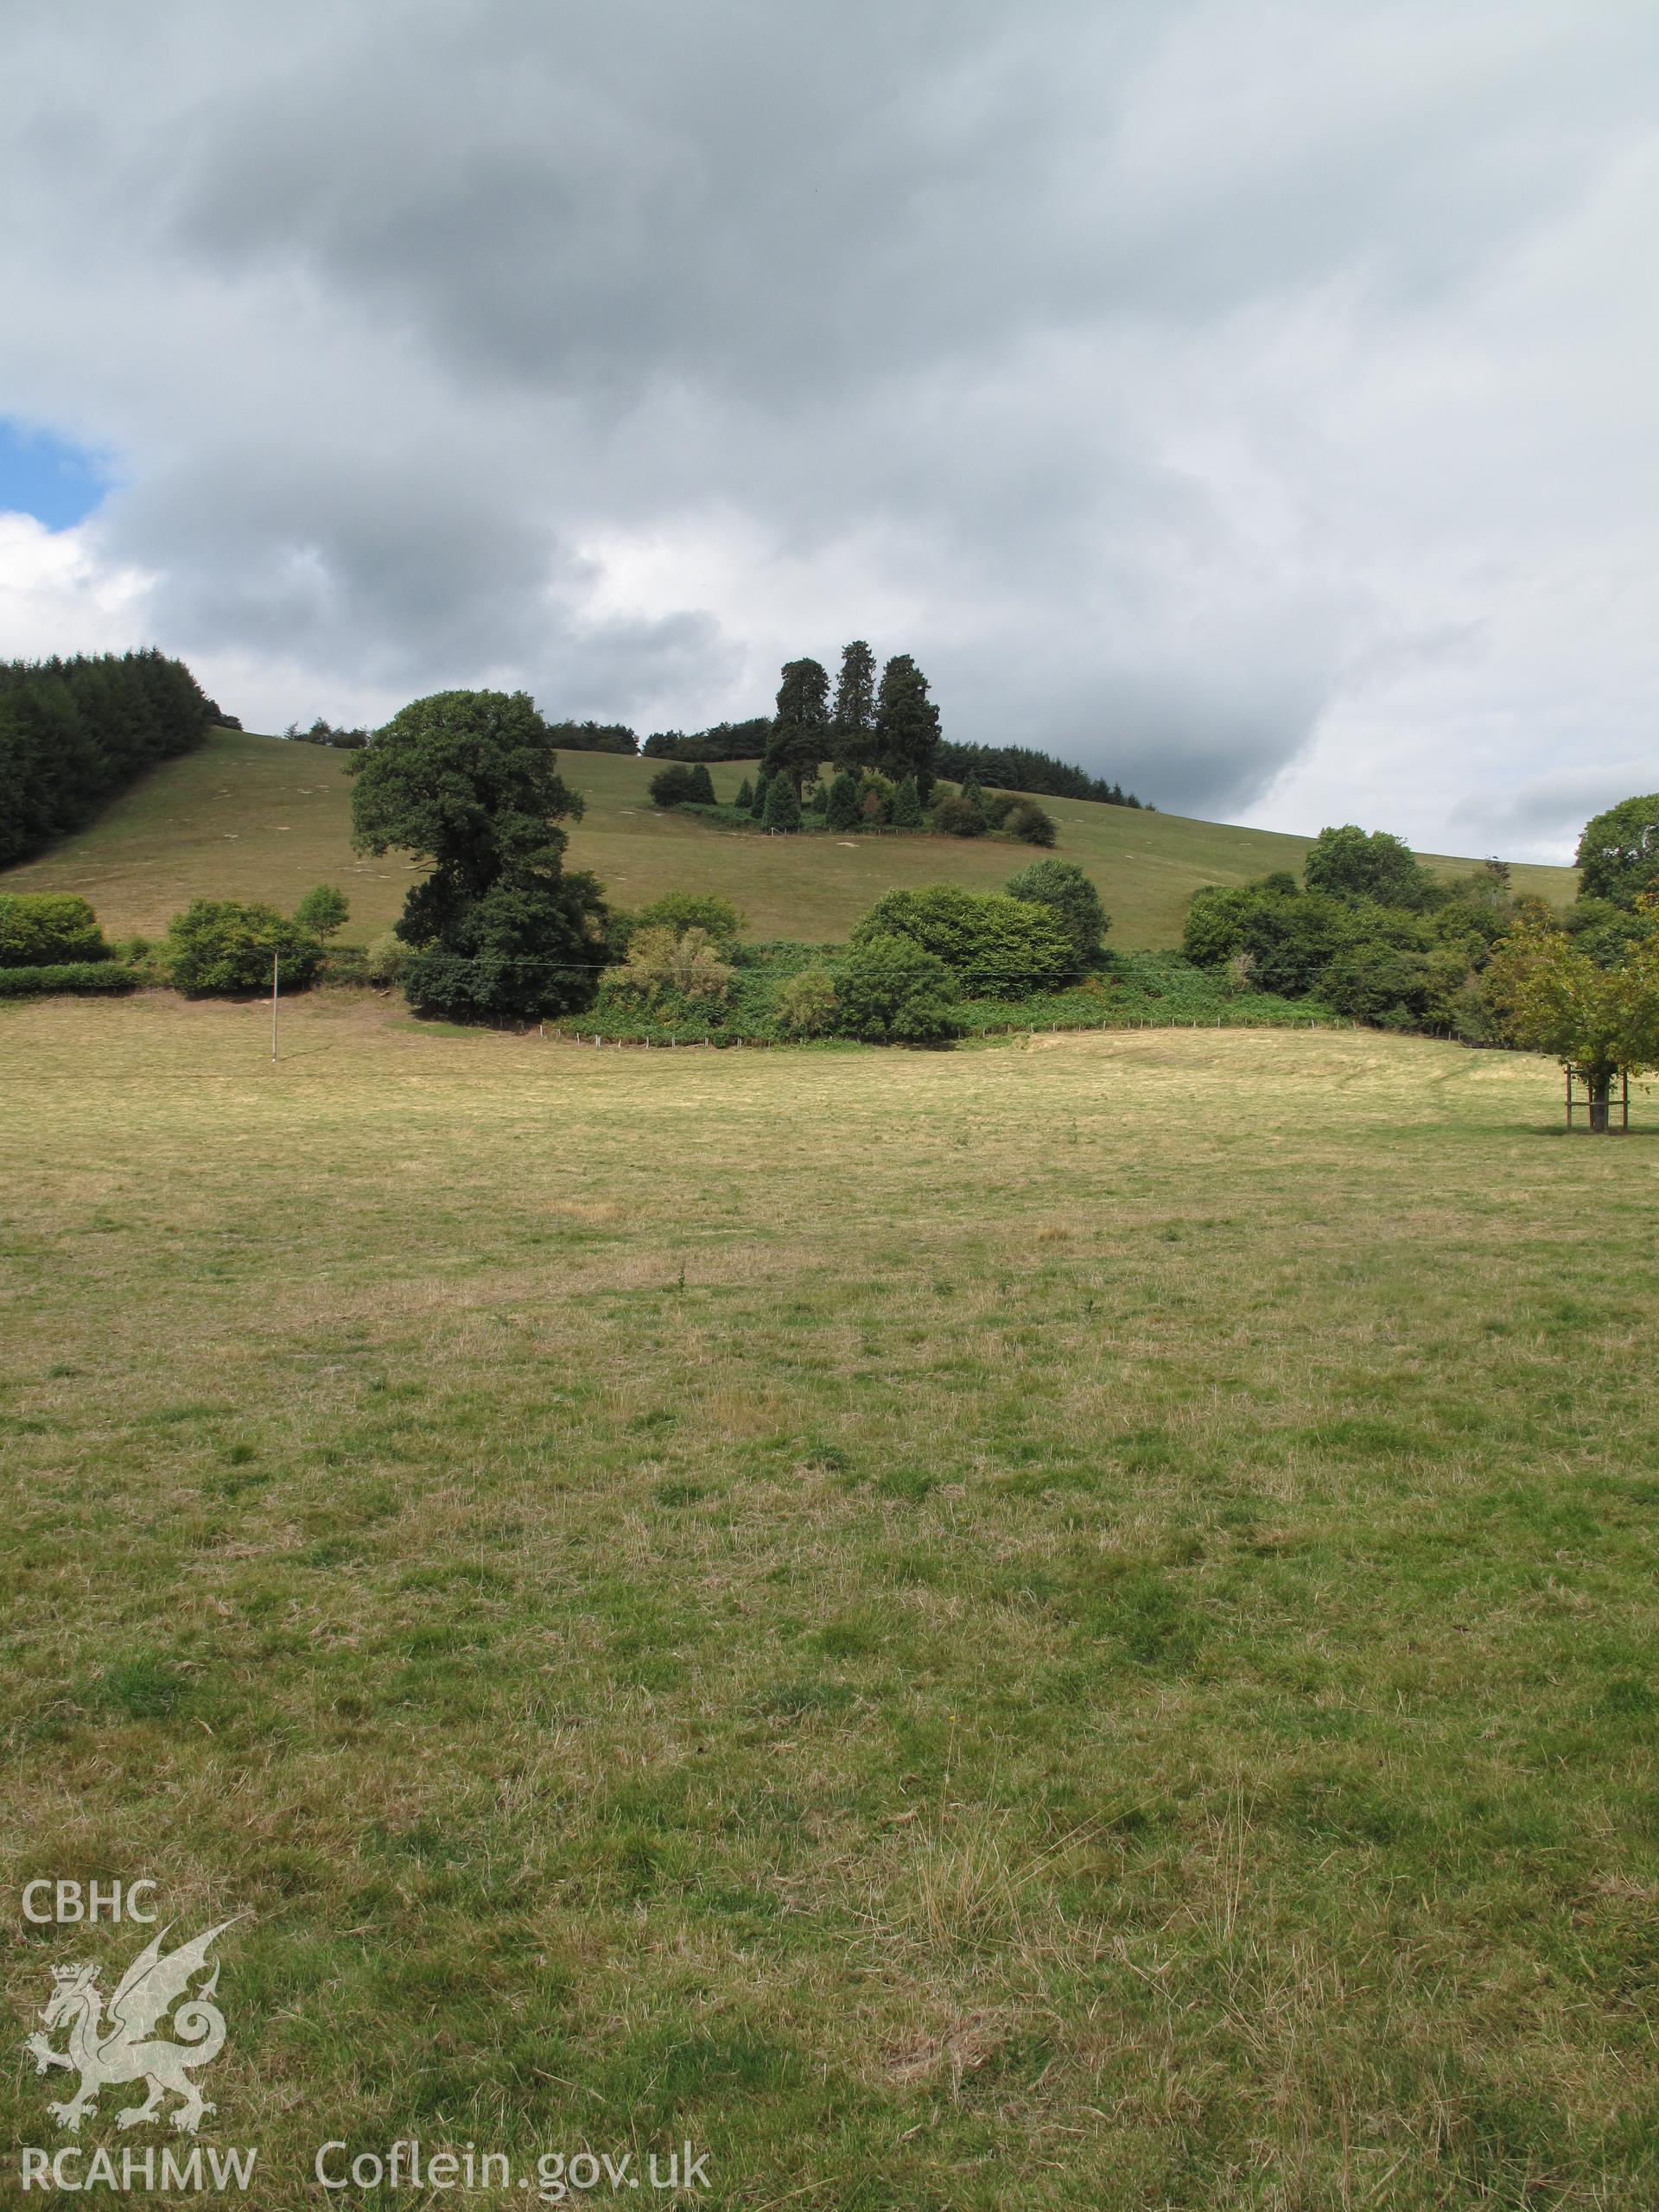 Bryn Glas, Pilleth Battle Site, from the east, taken by Brian Malaws on 24 August 2011.